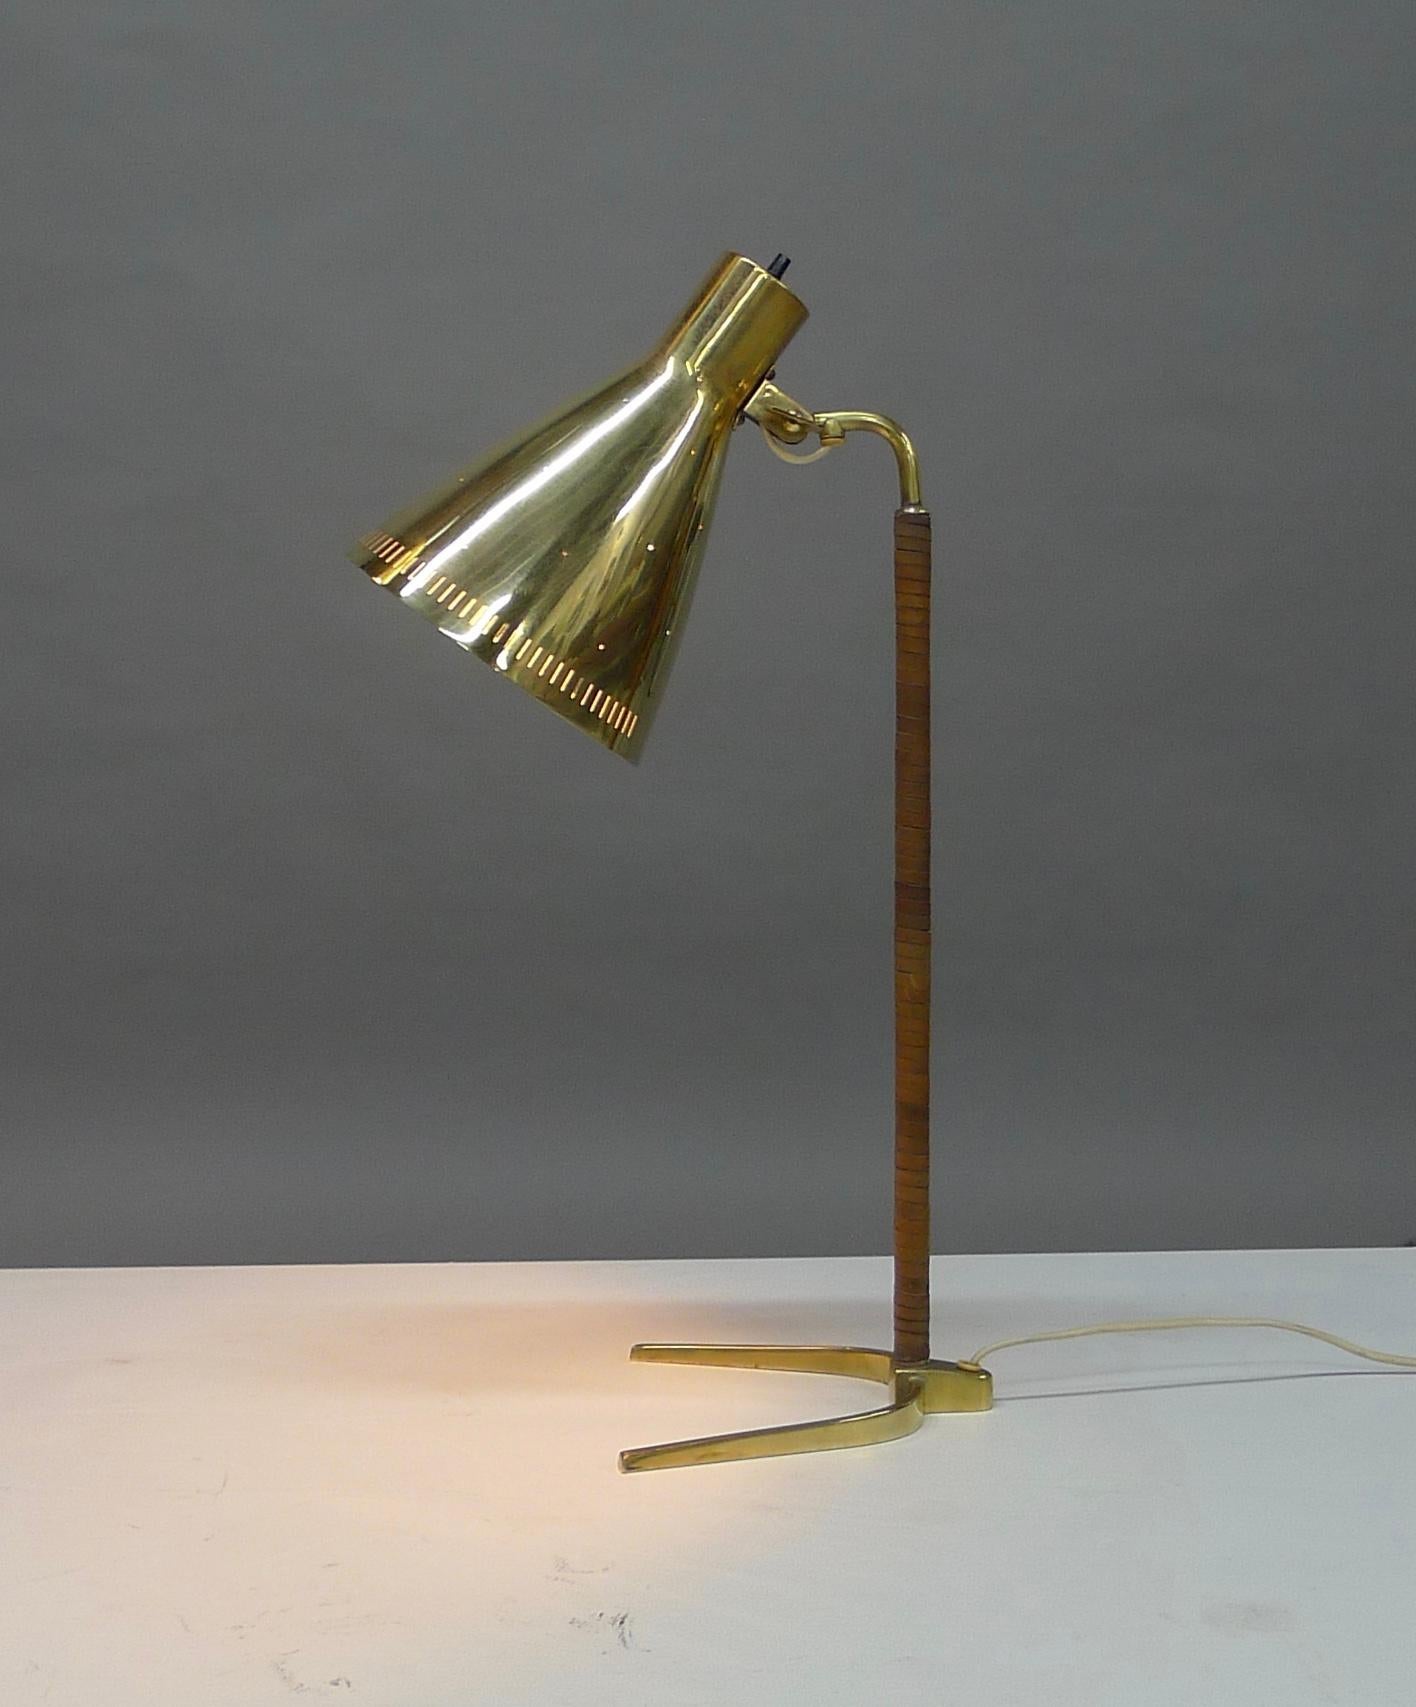 Paavo Tynell , Finland . Rare version of the 9224 desk lamp featuring a perforated shade so that light is subtely diffused through many tiny holes . Brass structure  with leather wrapping . The lamp is known as the 